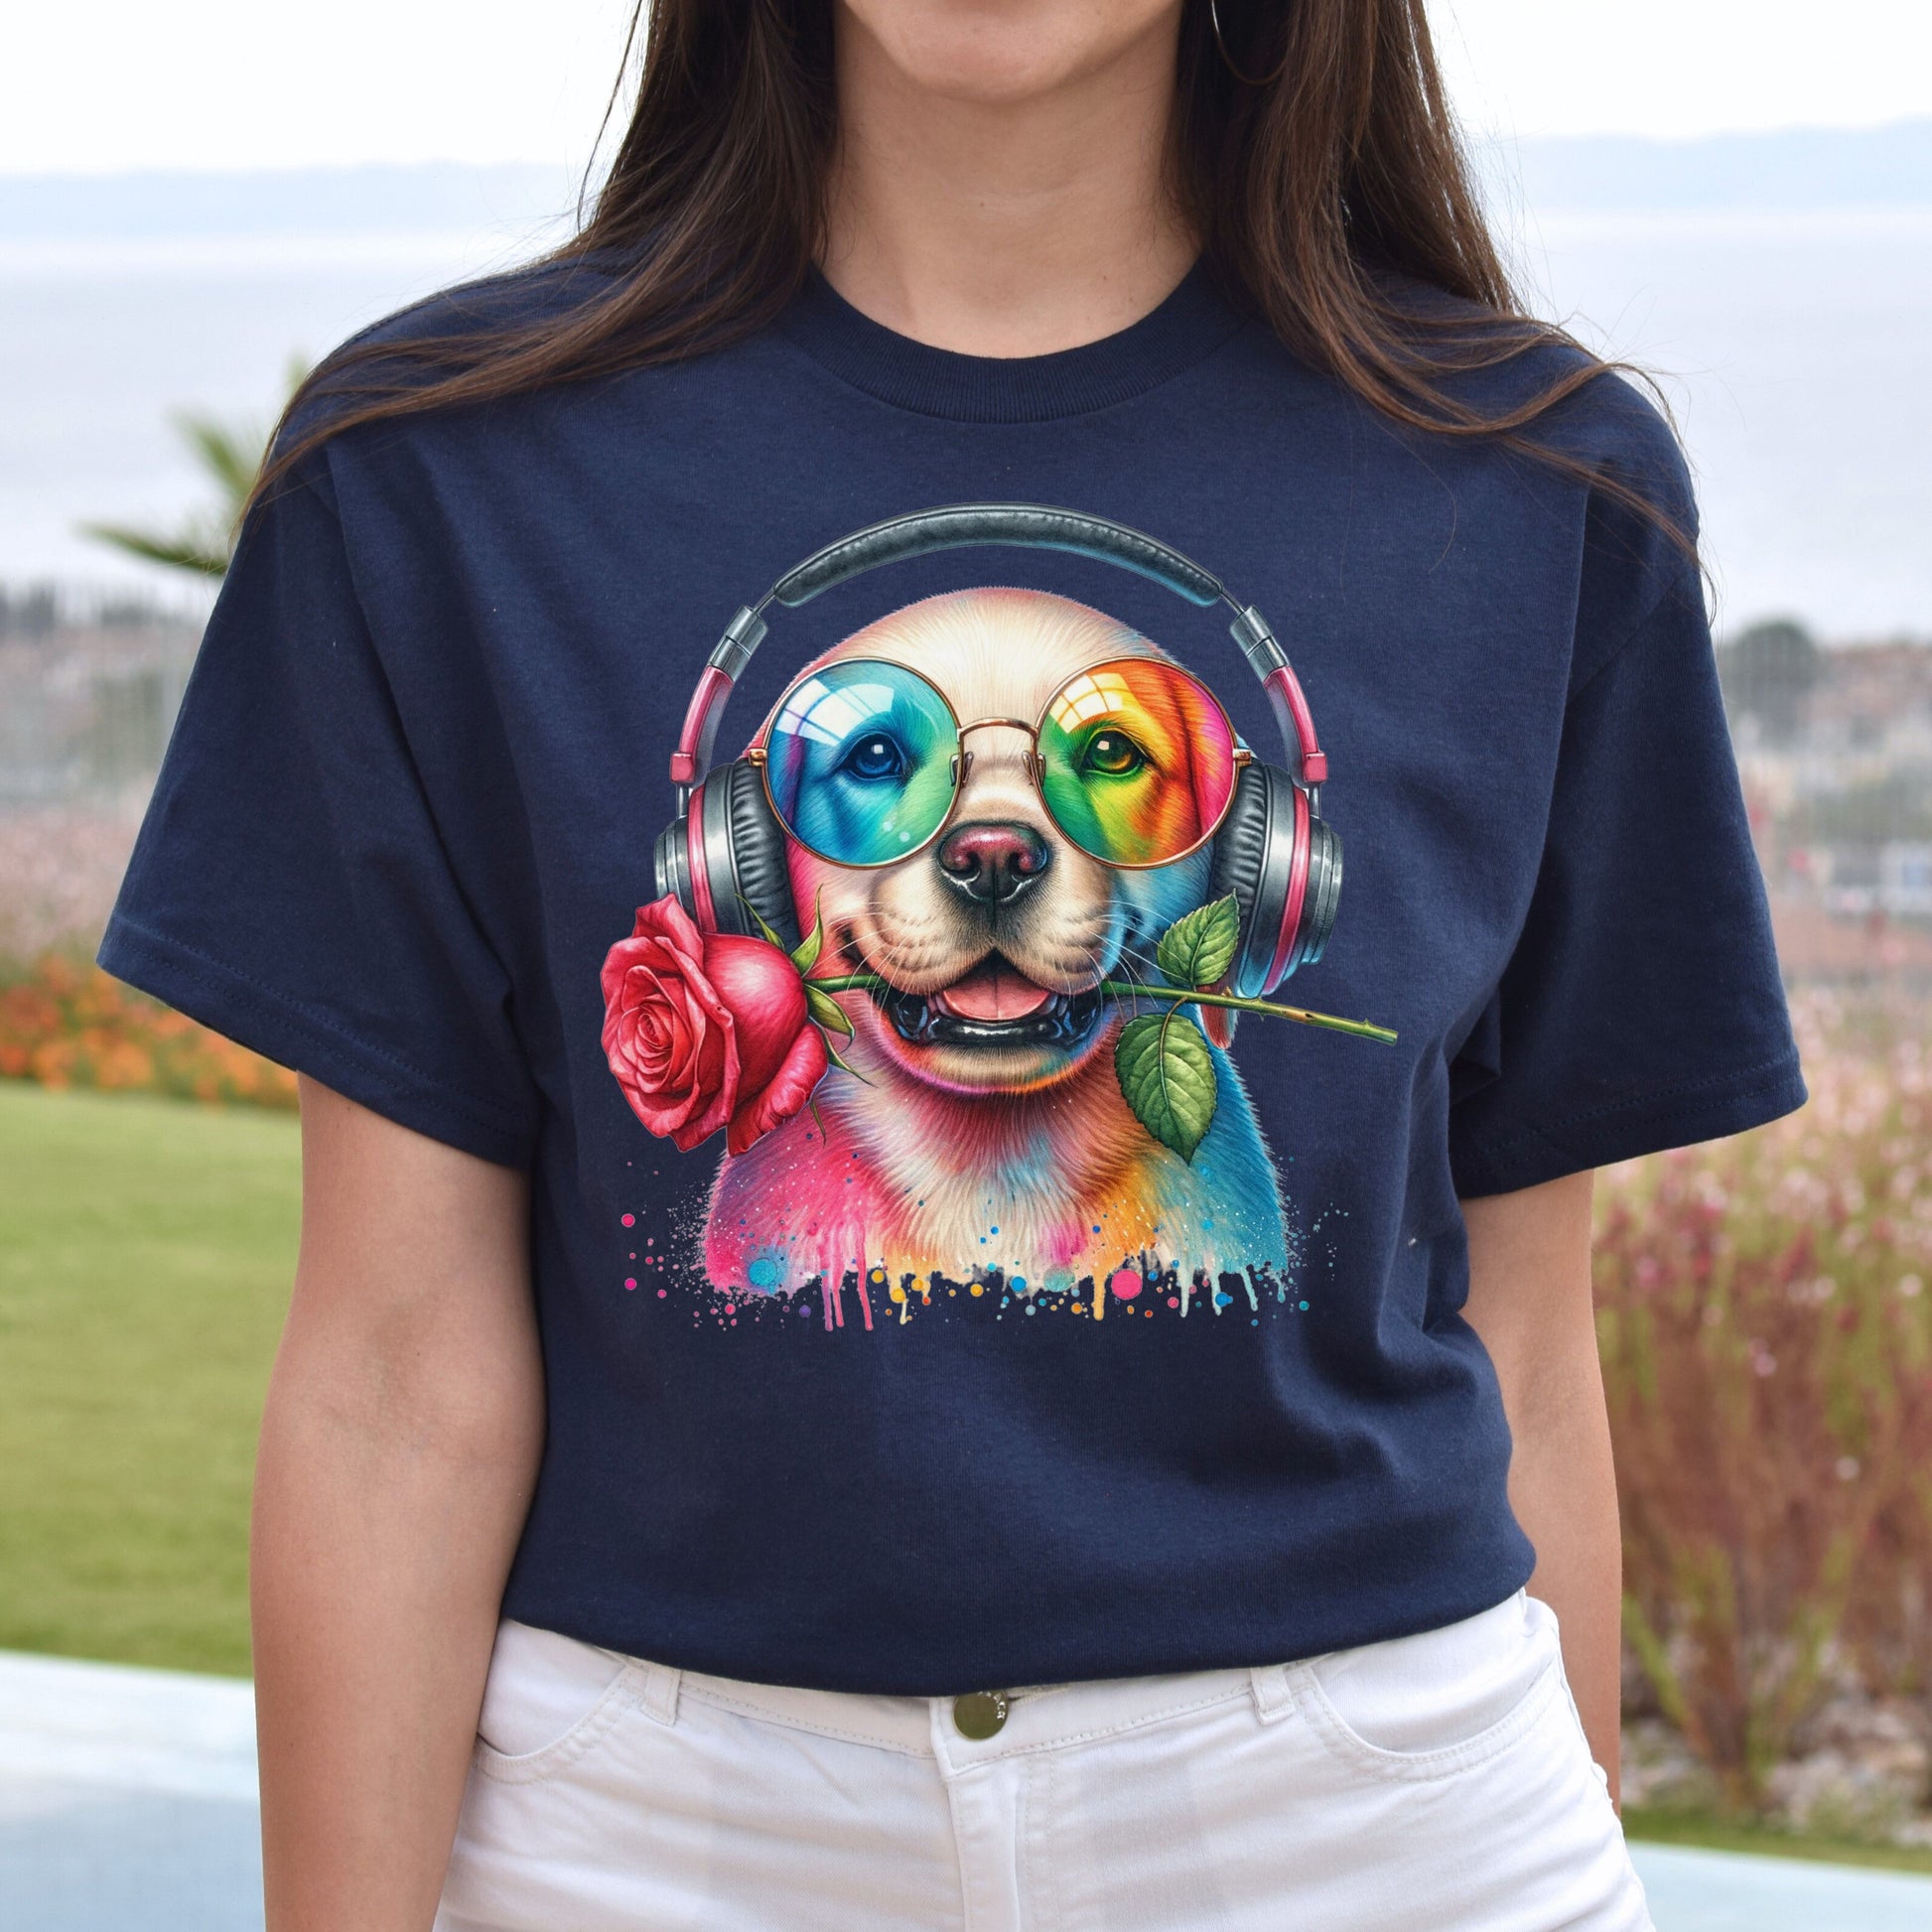 Labrador with Rose Colorful Unisex T-Shirt Cool romantic dog tee Black Navy Dark Heather-Navy-Family-Gift-Planet